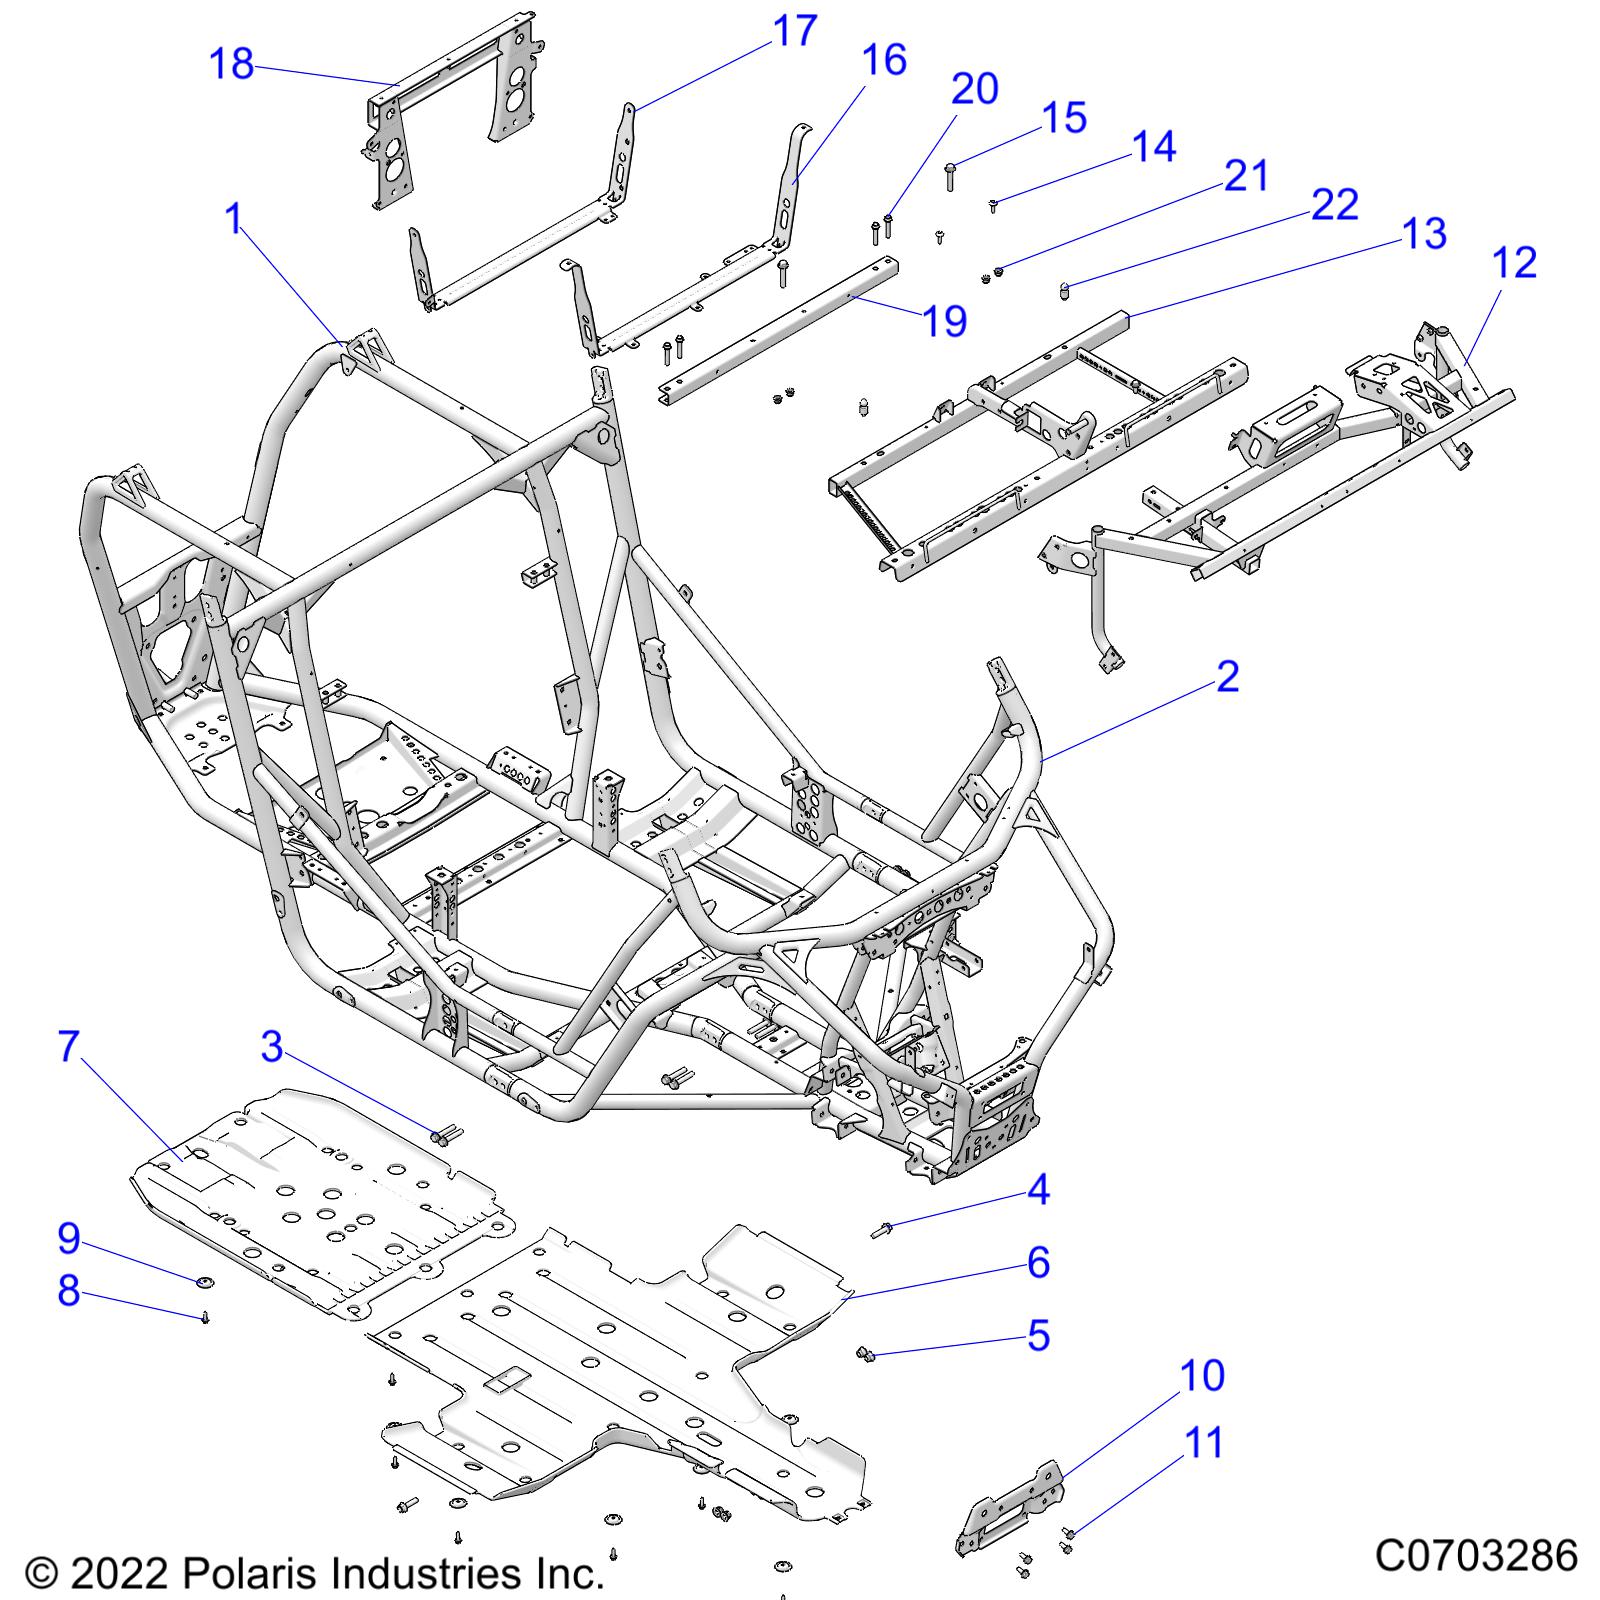 Part Number : 7556065 SKID PLATE WASHER